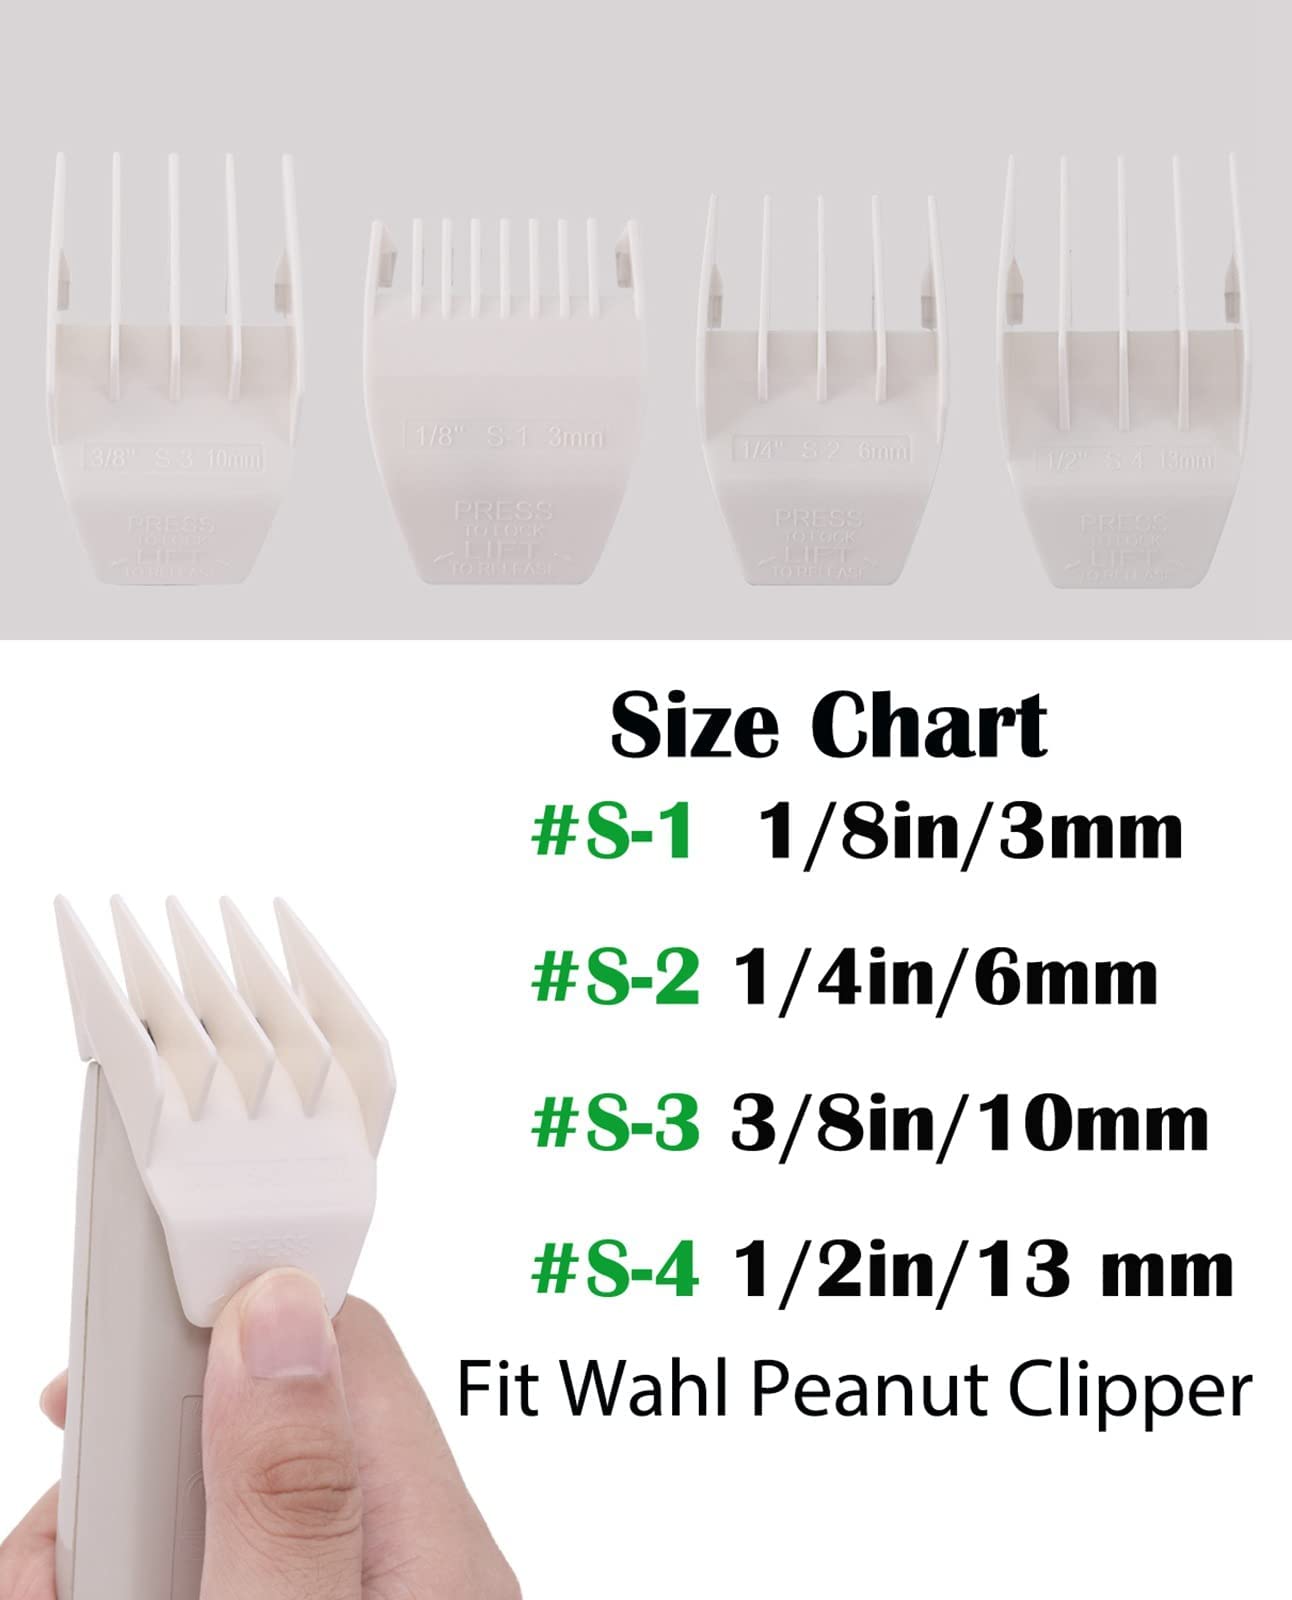 Professional Peanut Clipper/Trimmer Snap On Replacement Blades #2068-300,Detachable Trimmer Blade,Competible with Peanut Blade,Gold Color